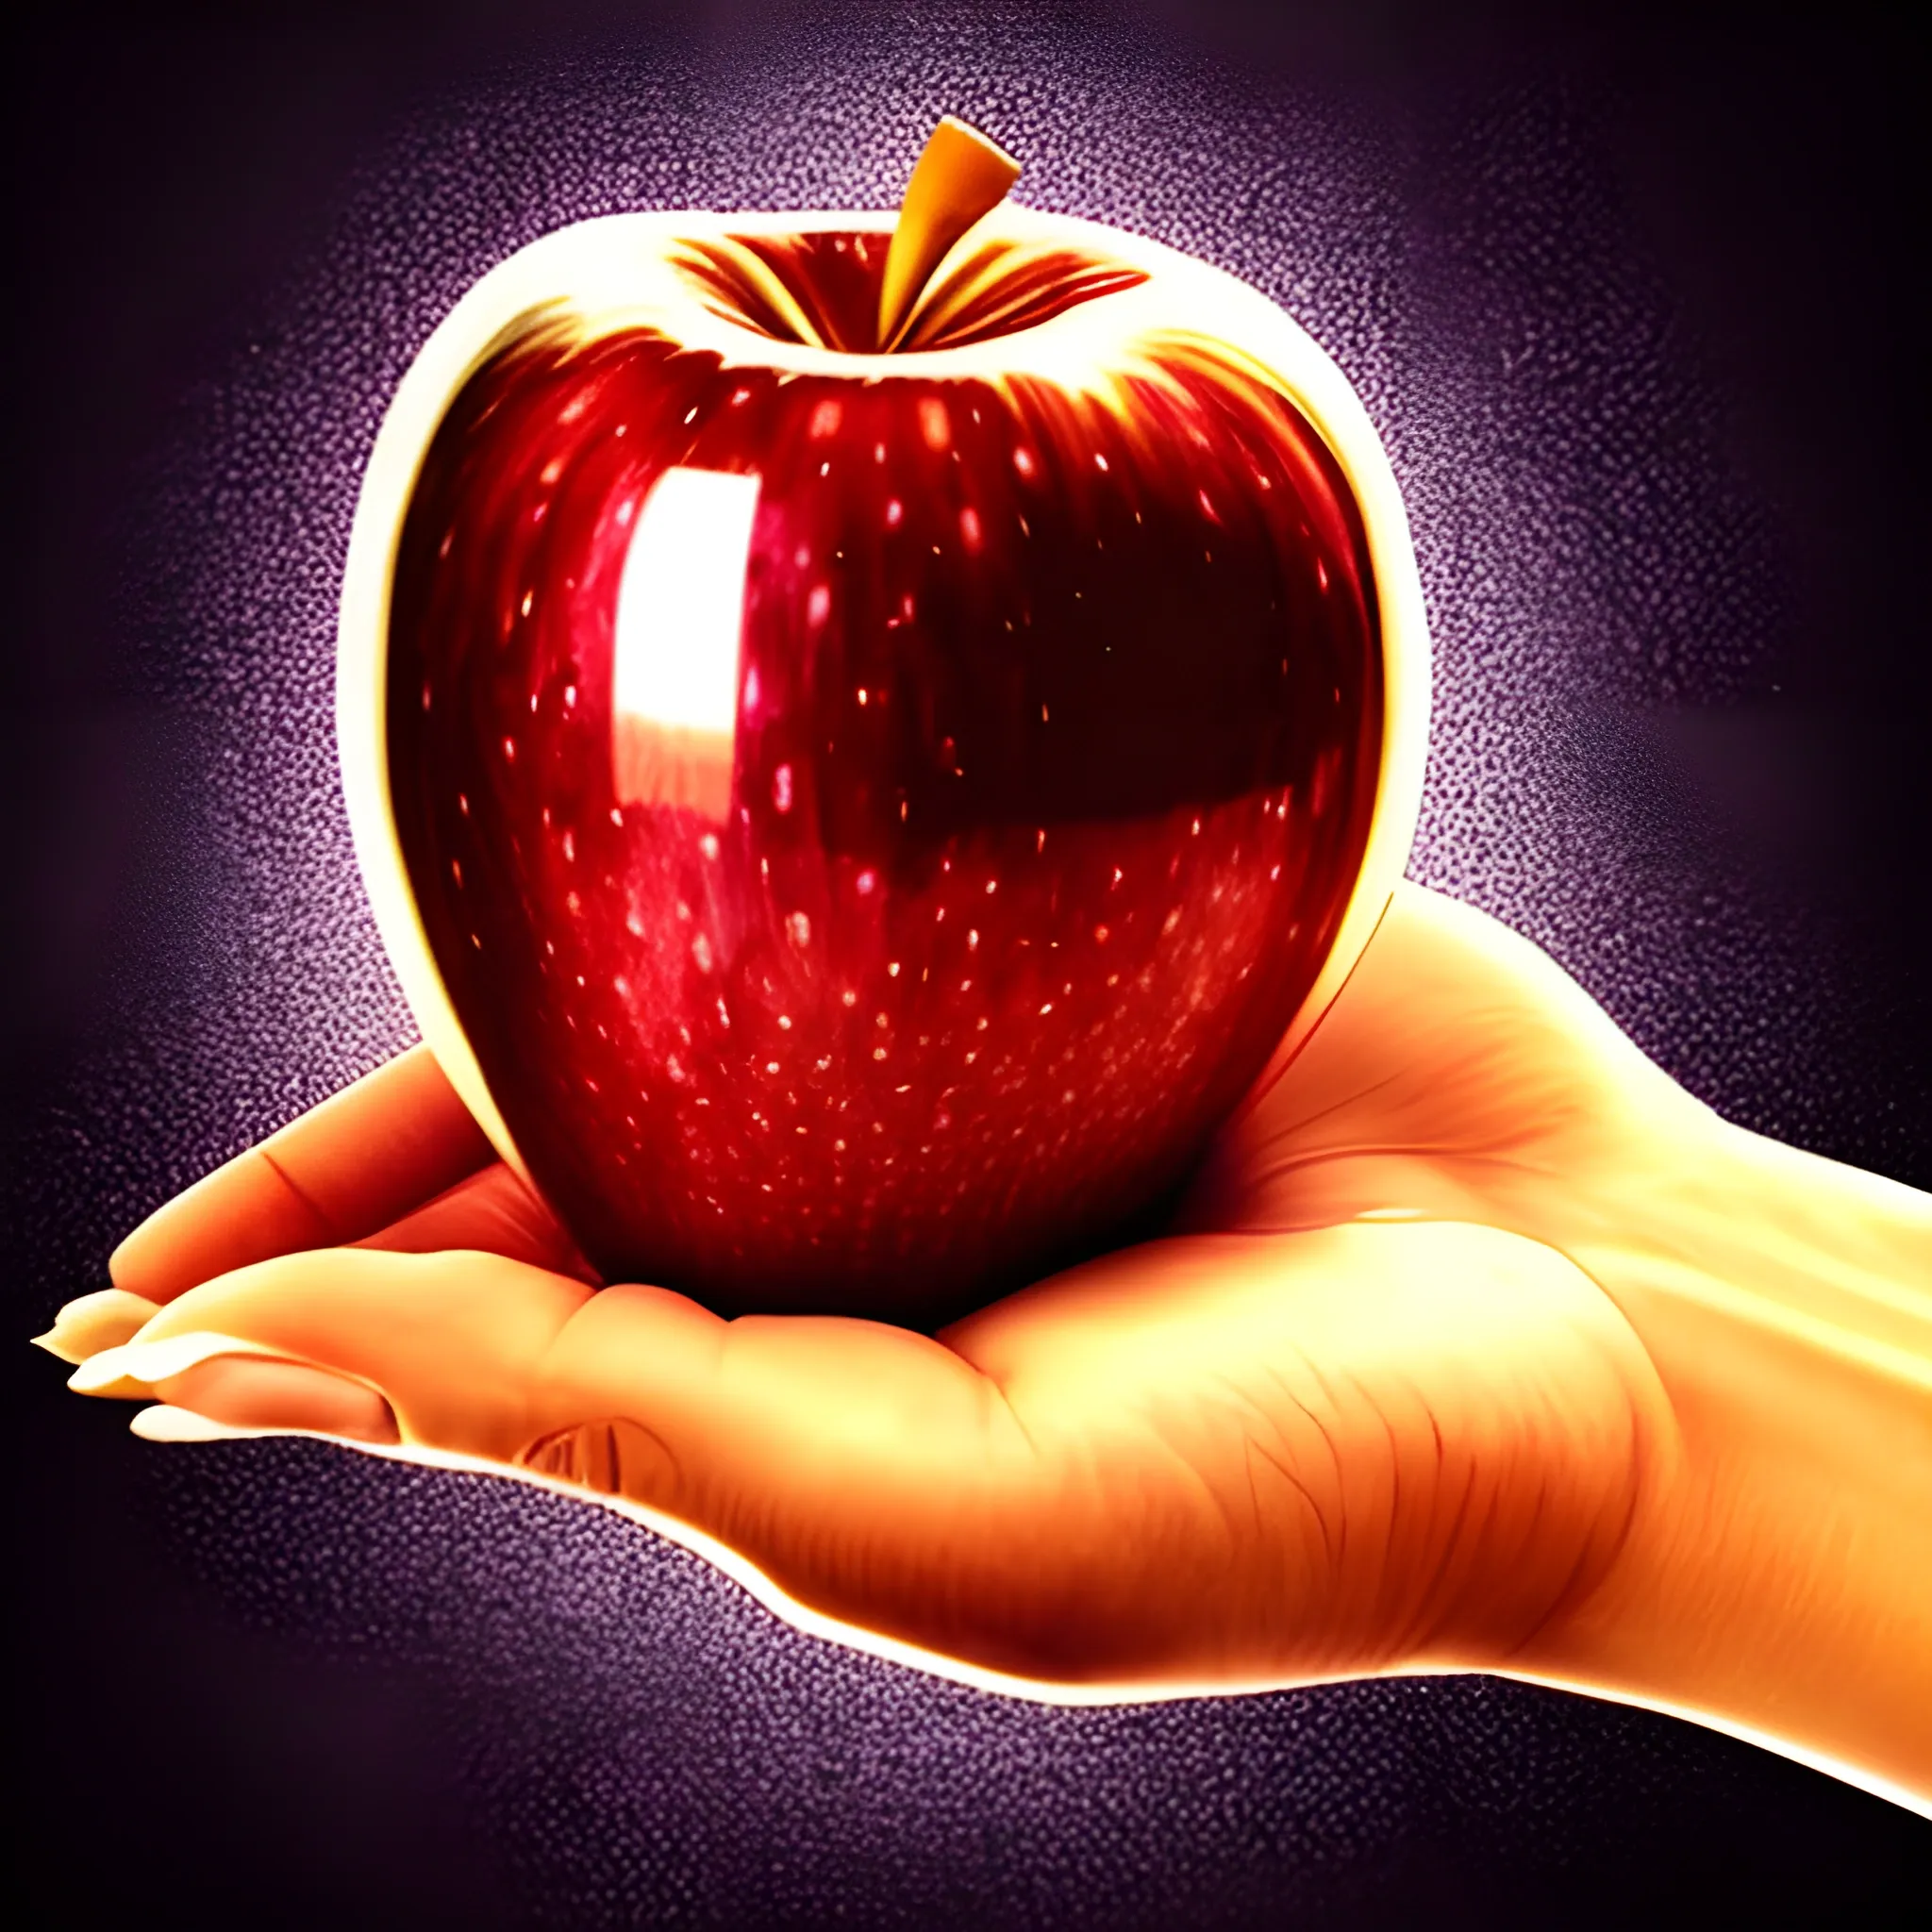 a hand holding an apple in surreal style
